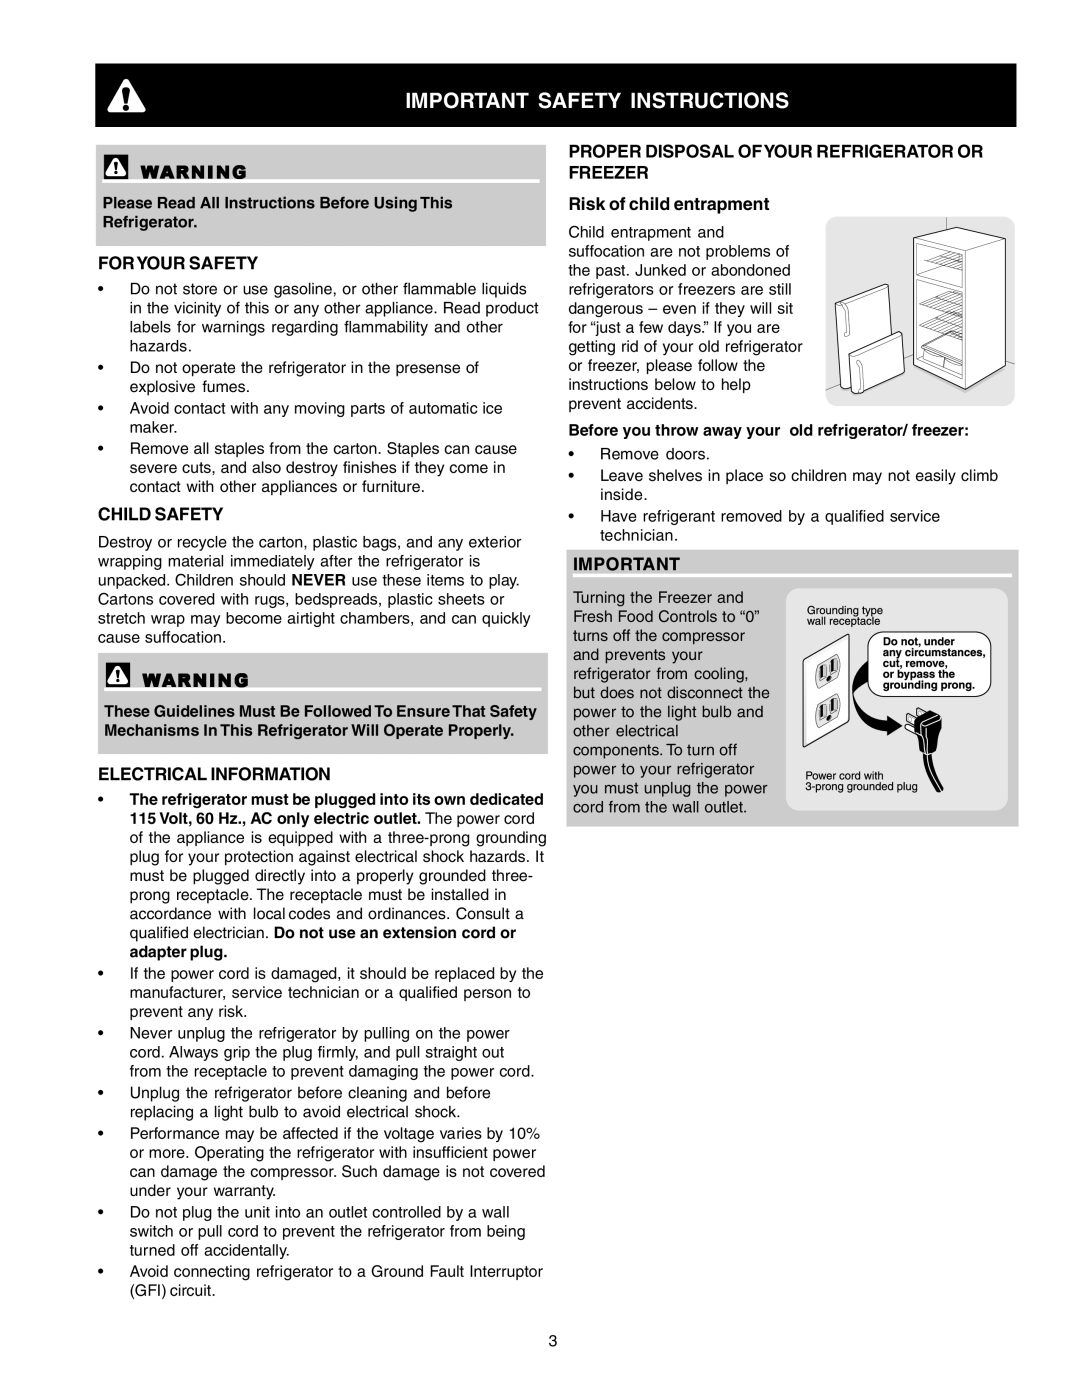 Crosley 241824301 warranty Important Safety Instructions, Foryour Safety, Child Safety, Electrical Information 